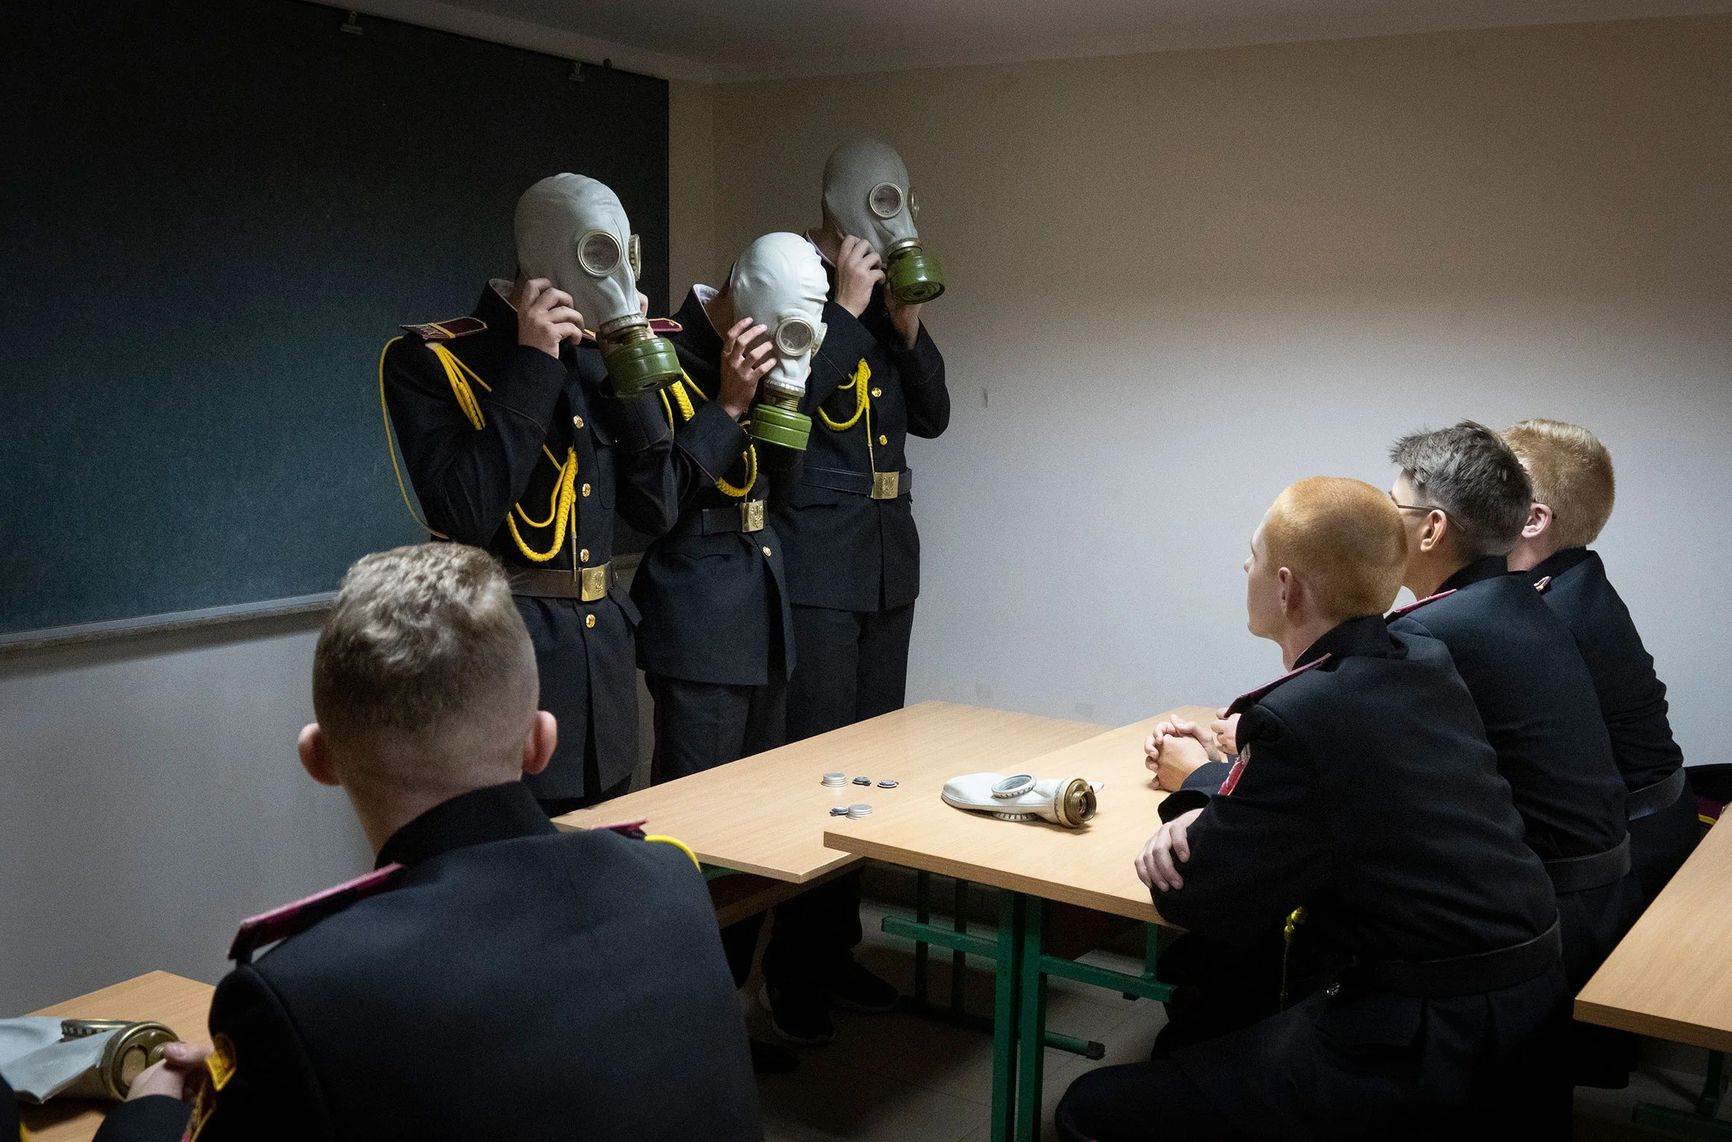 Cadets practice an emergency situation during a lesson in a bomb shelter on the first day of school at a cadet lyceum in Kyiv, Ukraine, on Sept. 1.